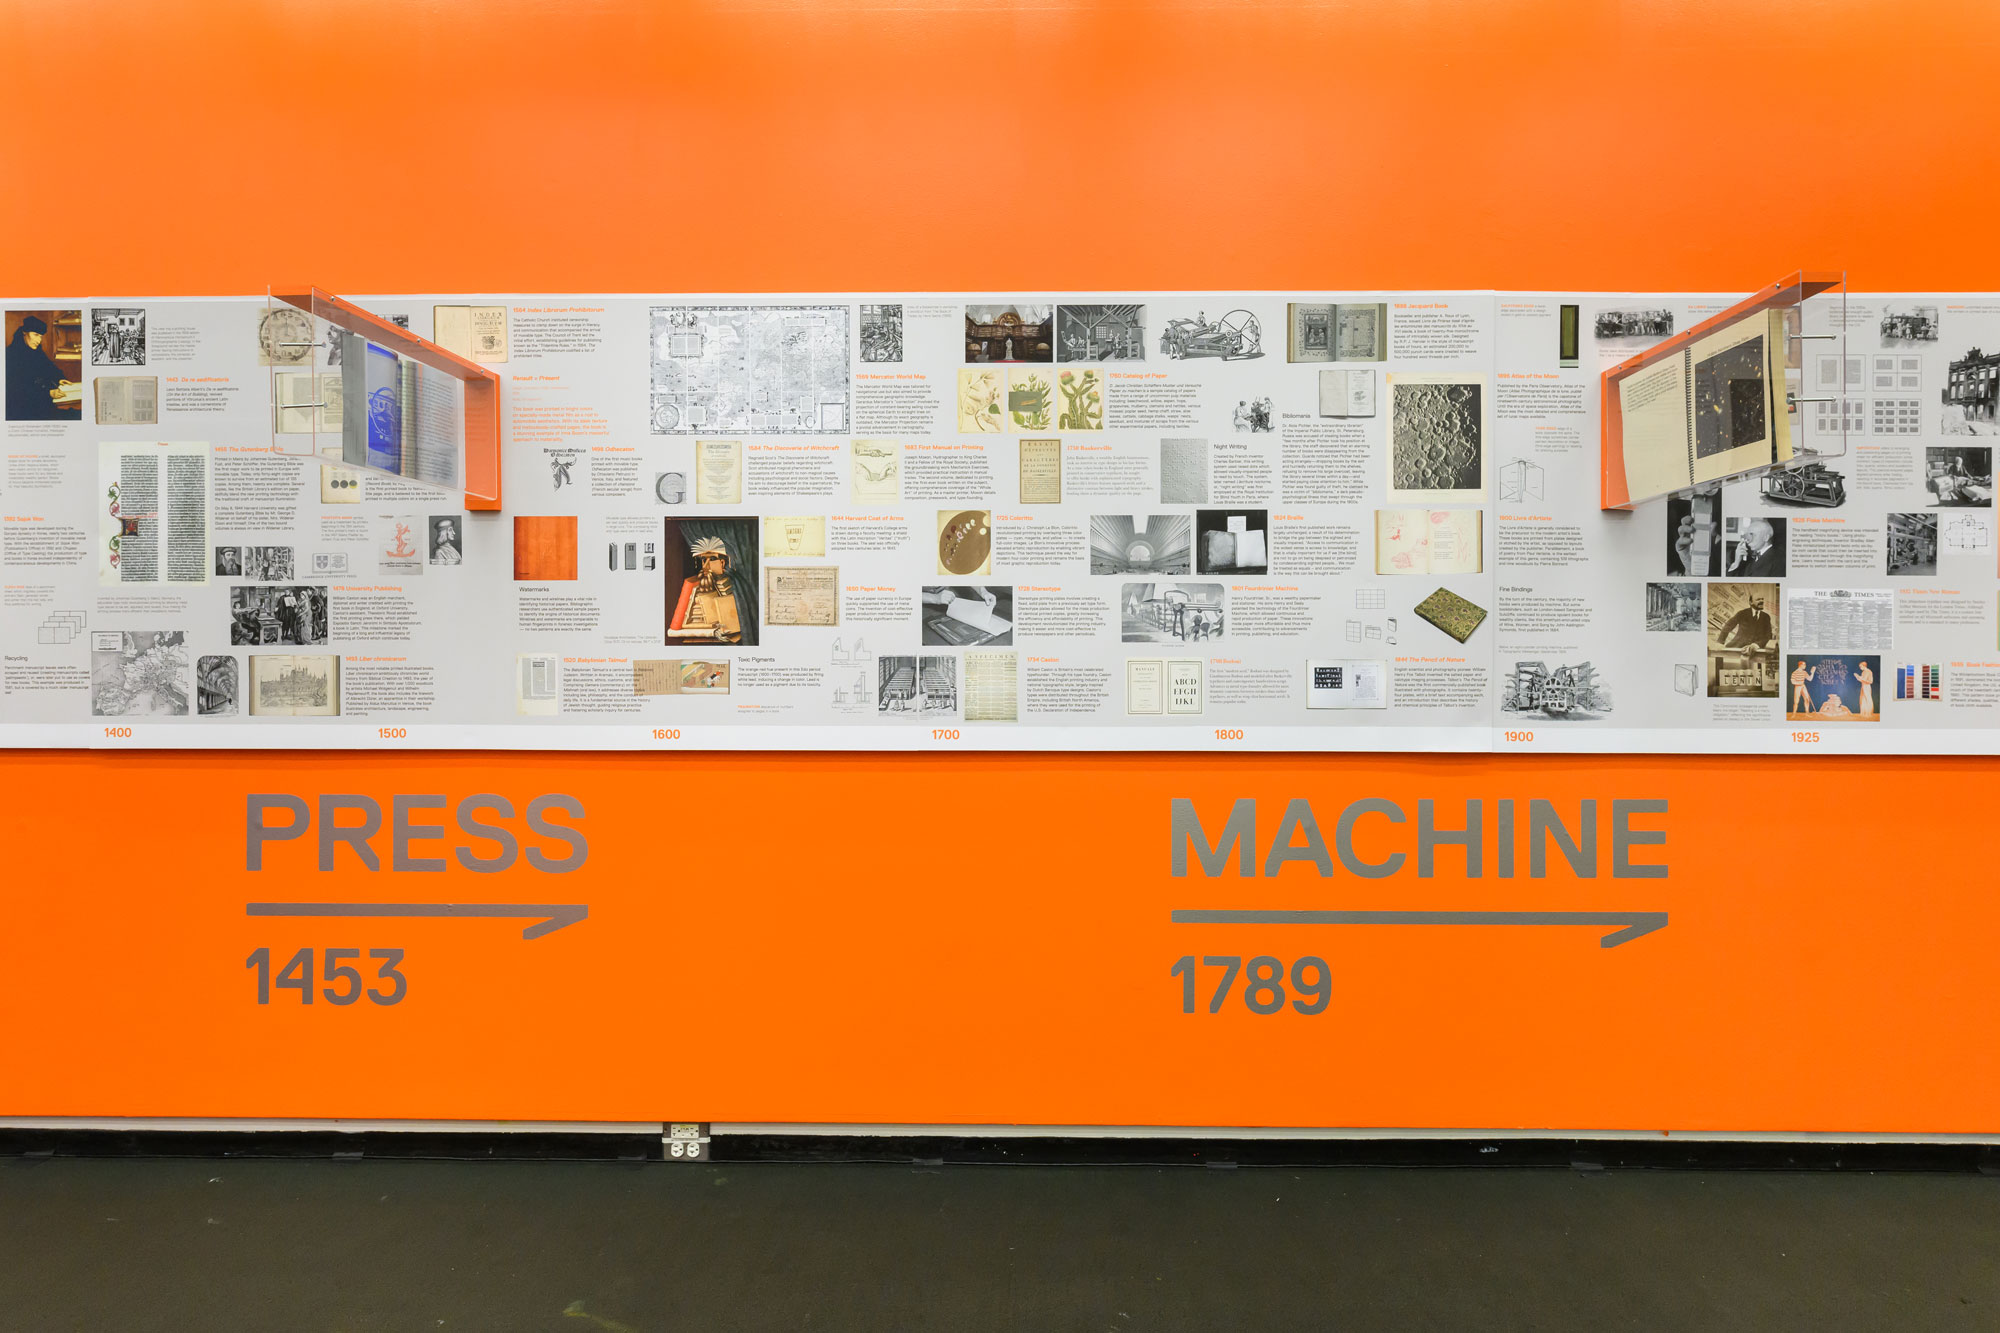 Image of exhibition on bookmaking showing press and machine publications